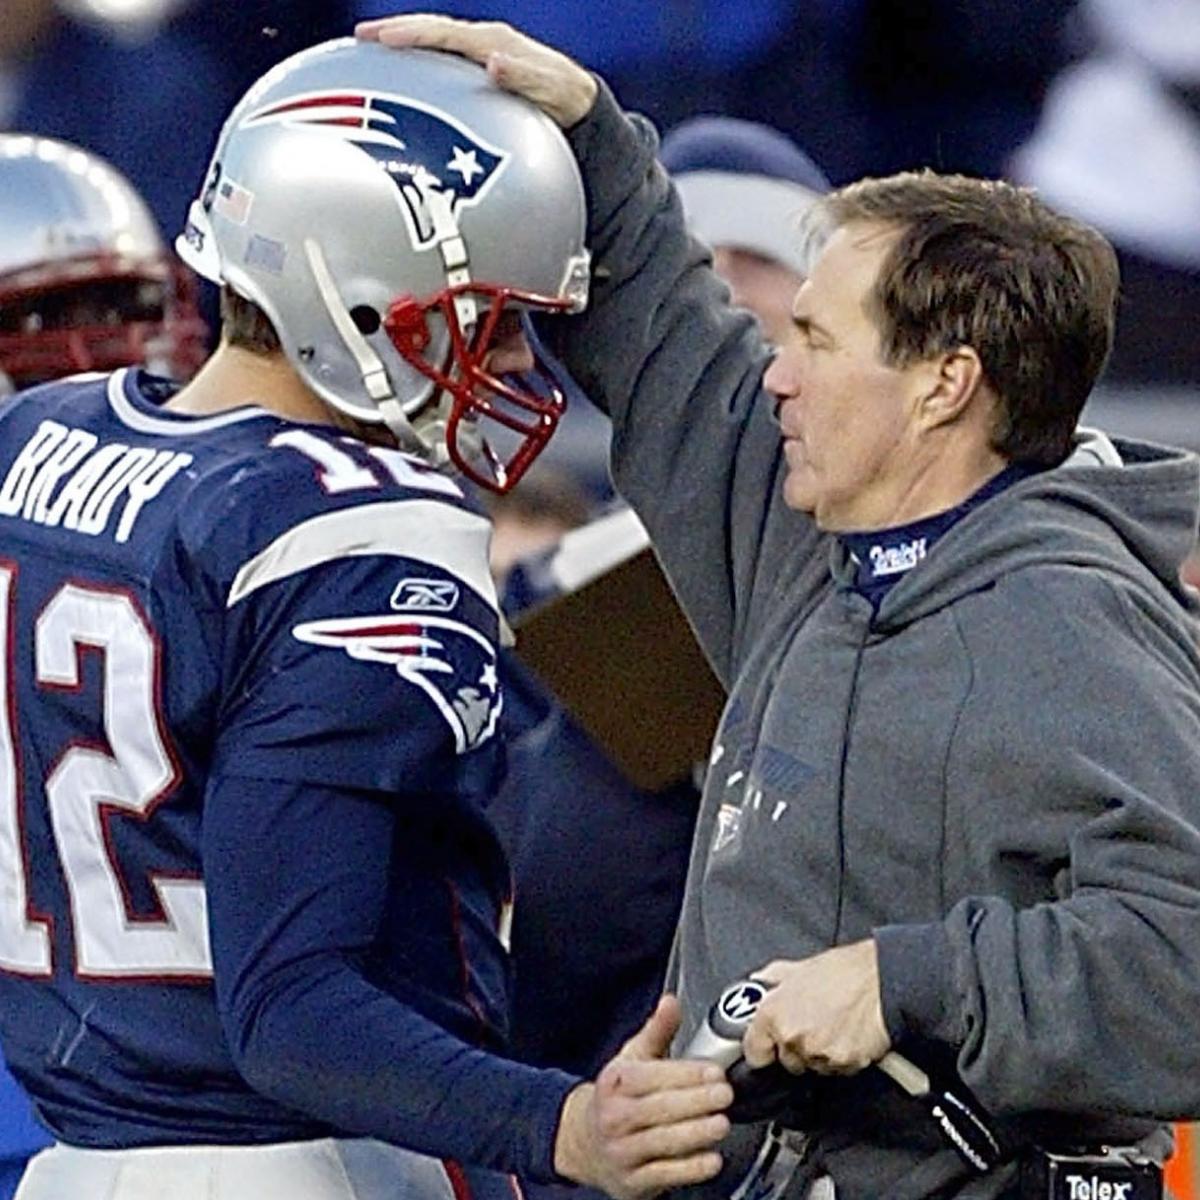 The 5 Games That Will Determine Patriots' Fate in 2013